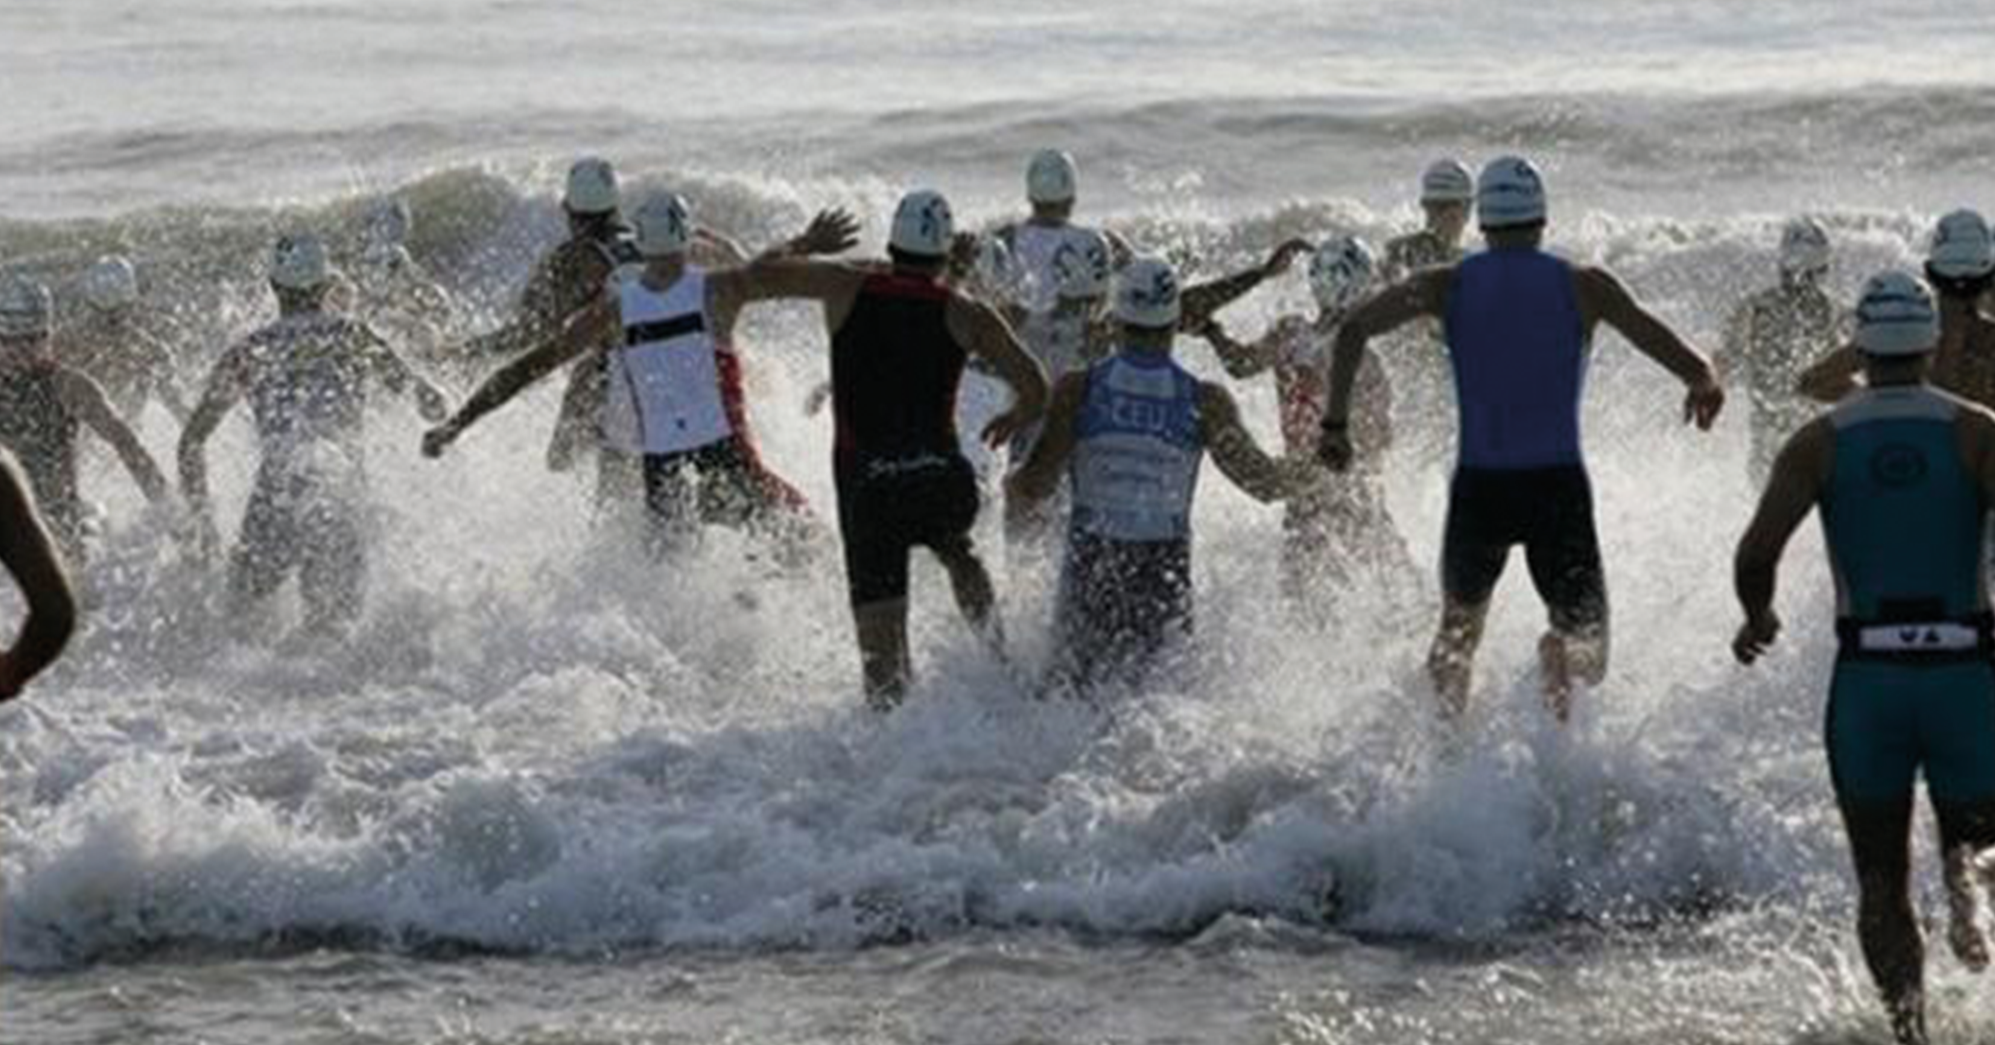 Tips for your first Triathlon event